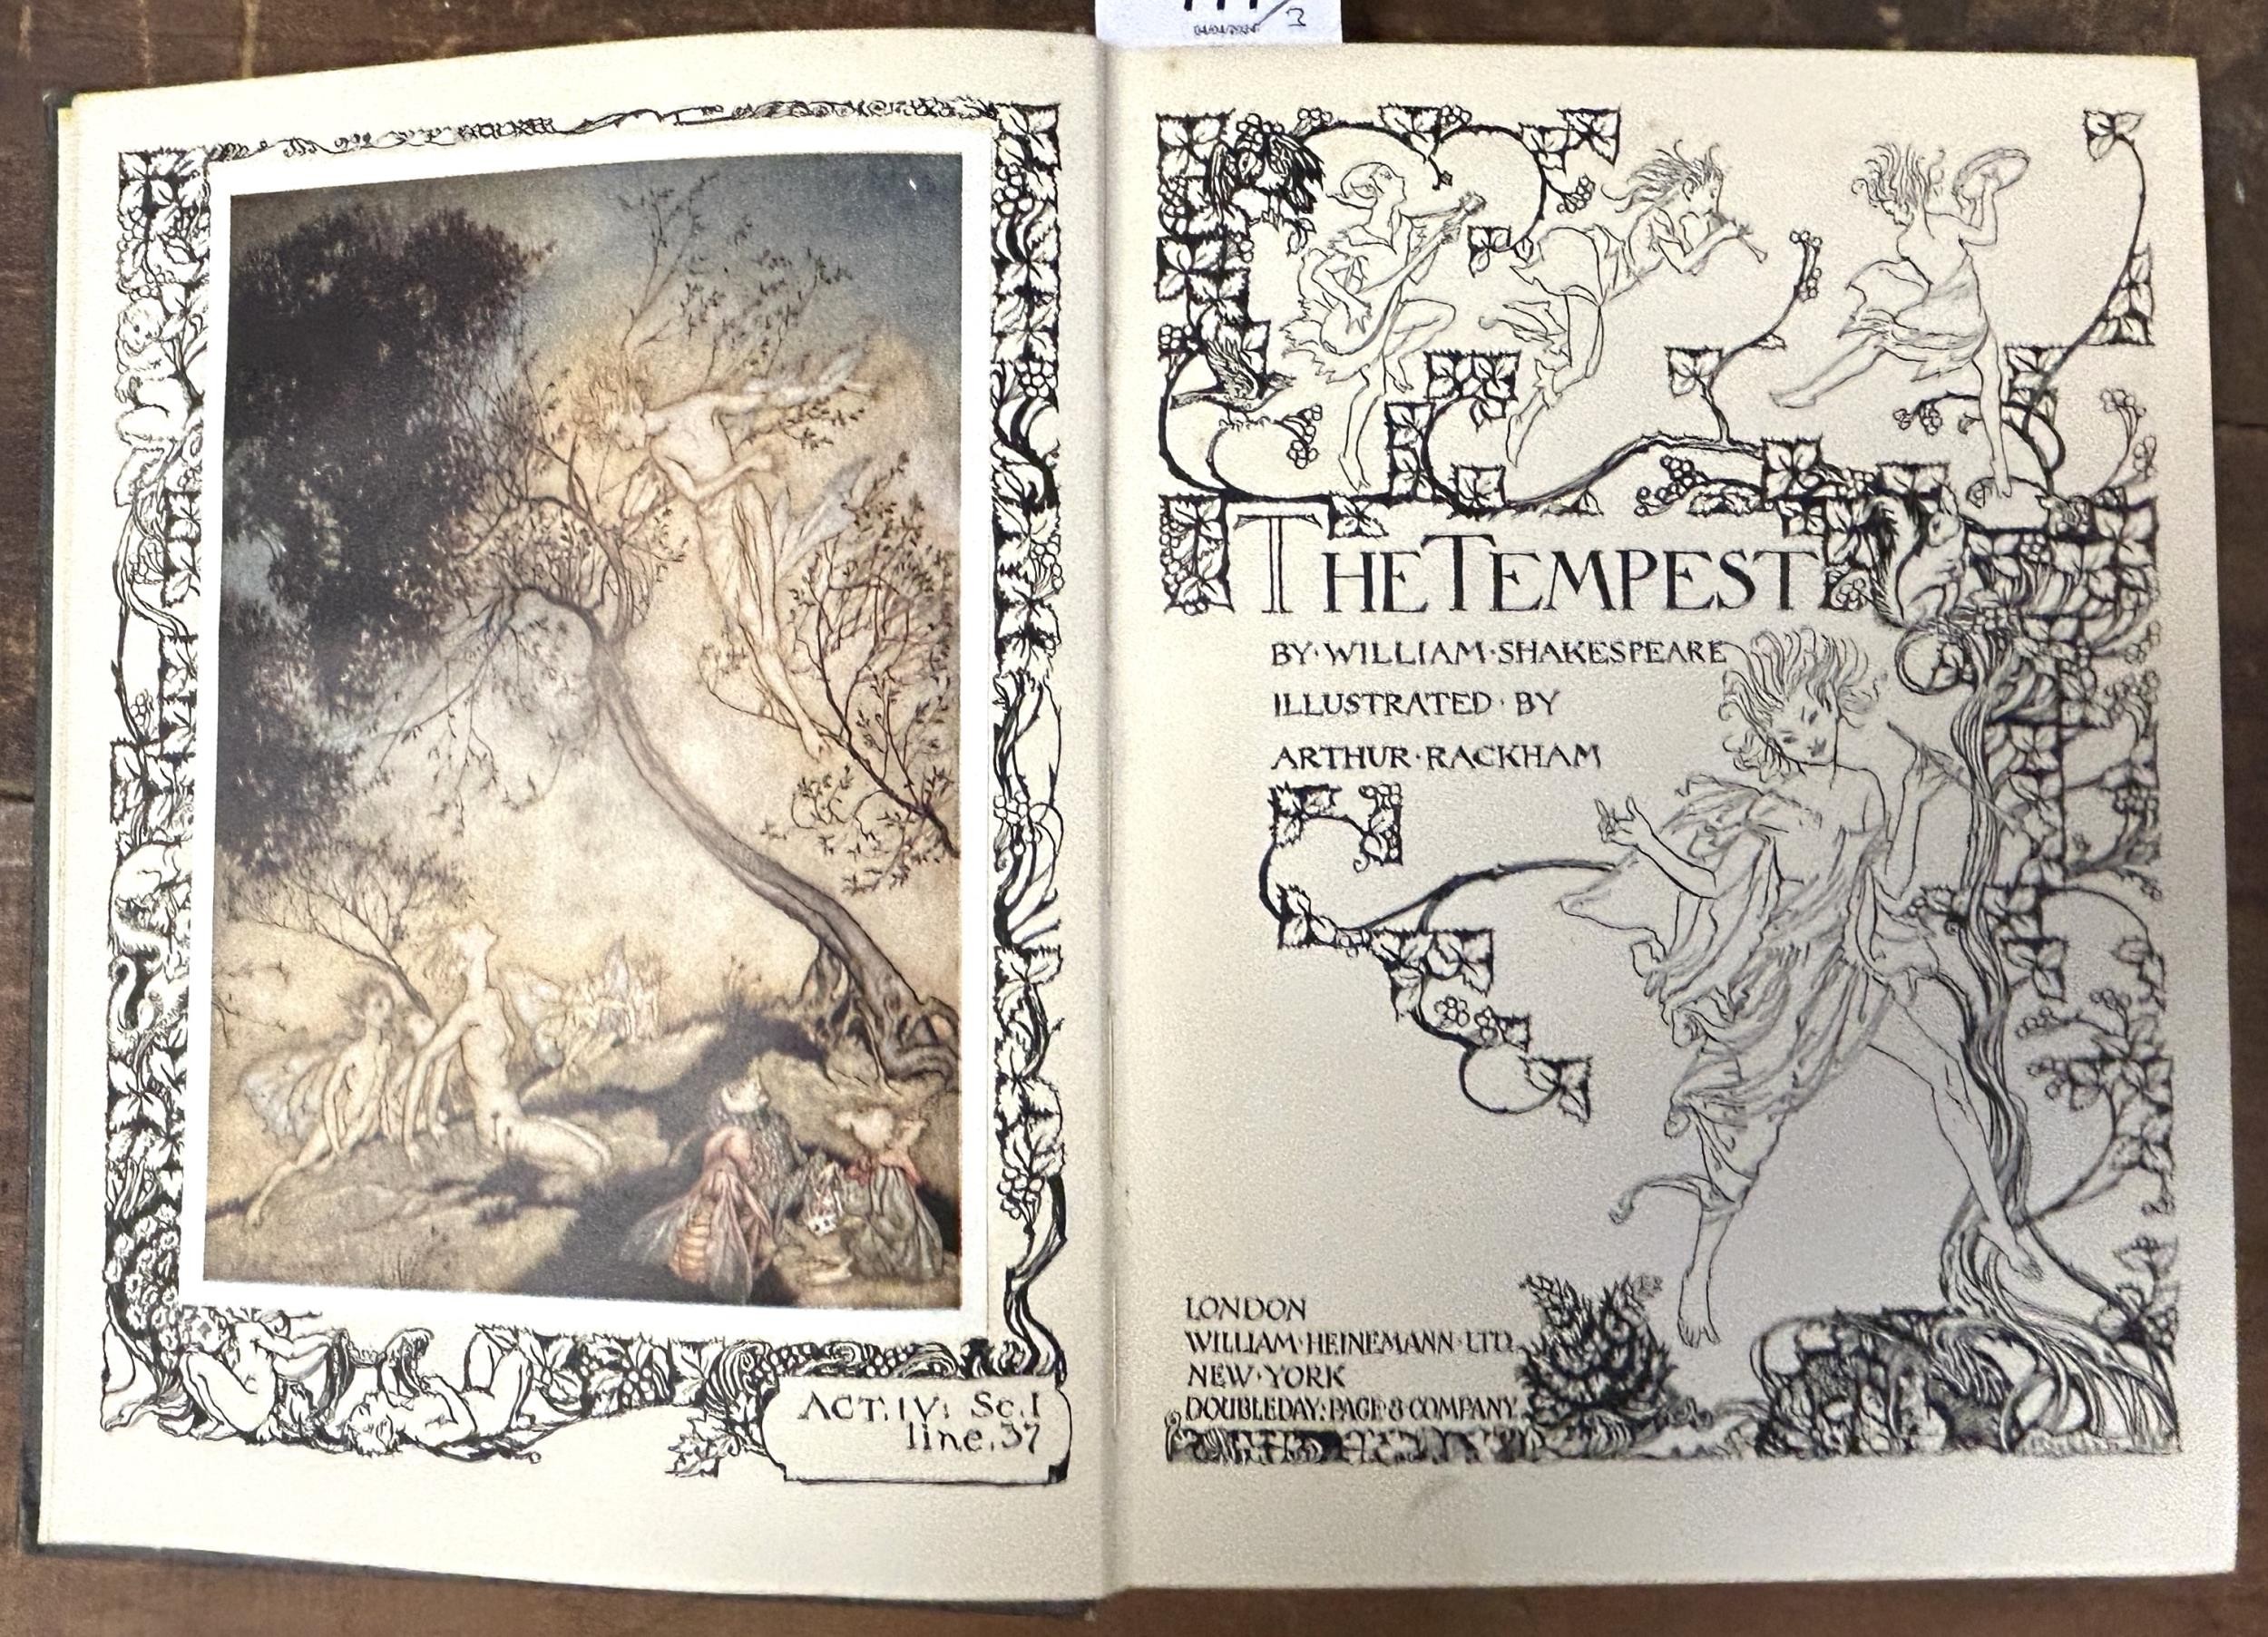 The Tempest, illustrated by Arthur Rackham, The Queens Book For the Red Cross, and The Princess